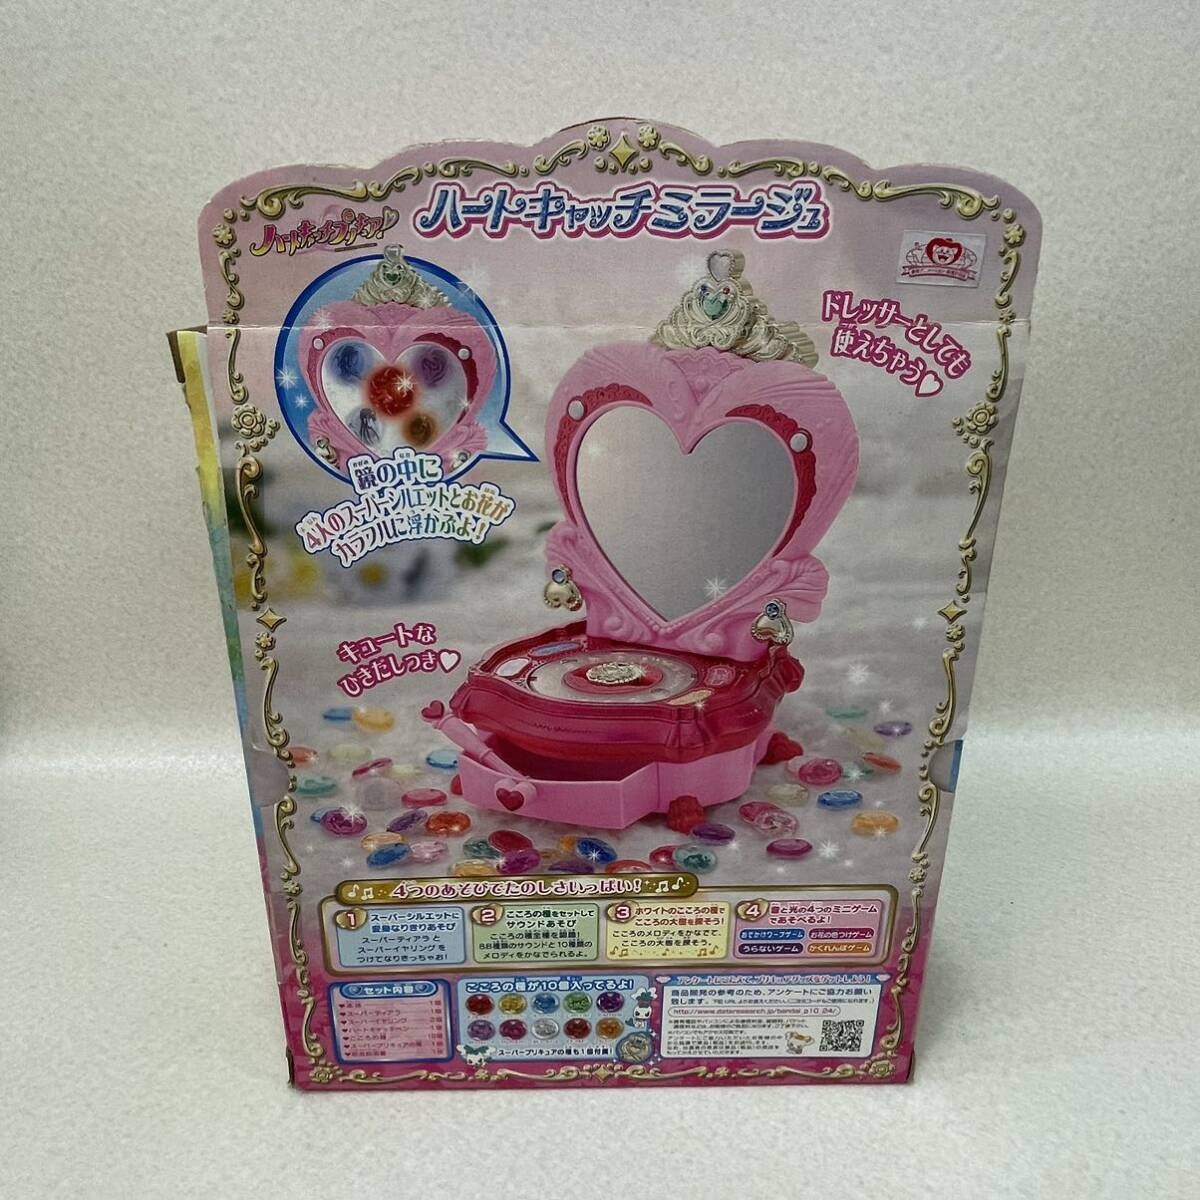 H6064* secondhand goods * electrification has confirmed * Heart catch Precure Heart catch Mirage Bandai including in a package un- possible 